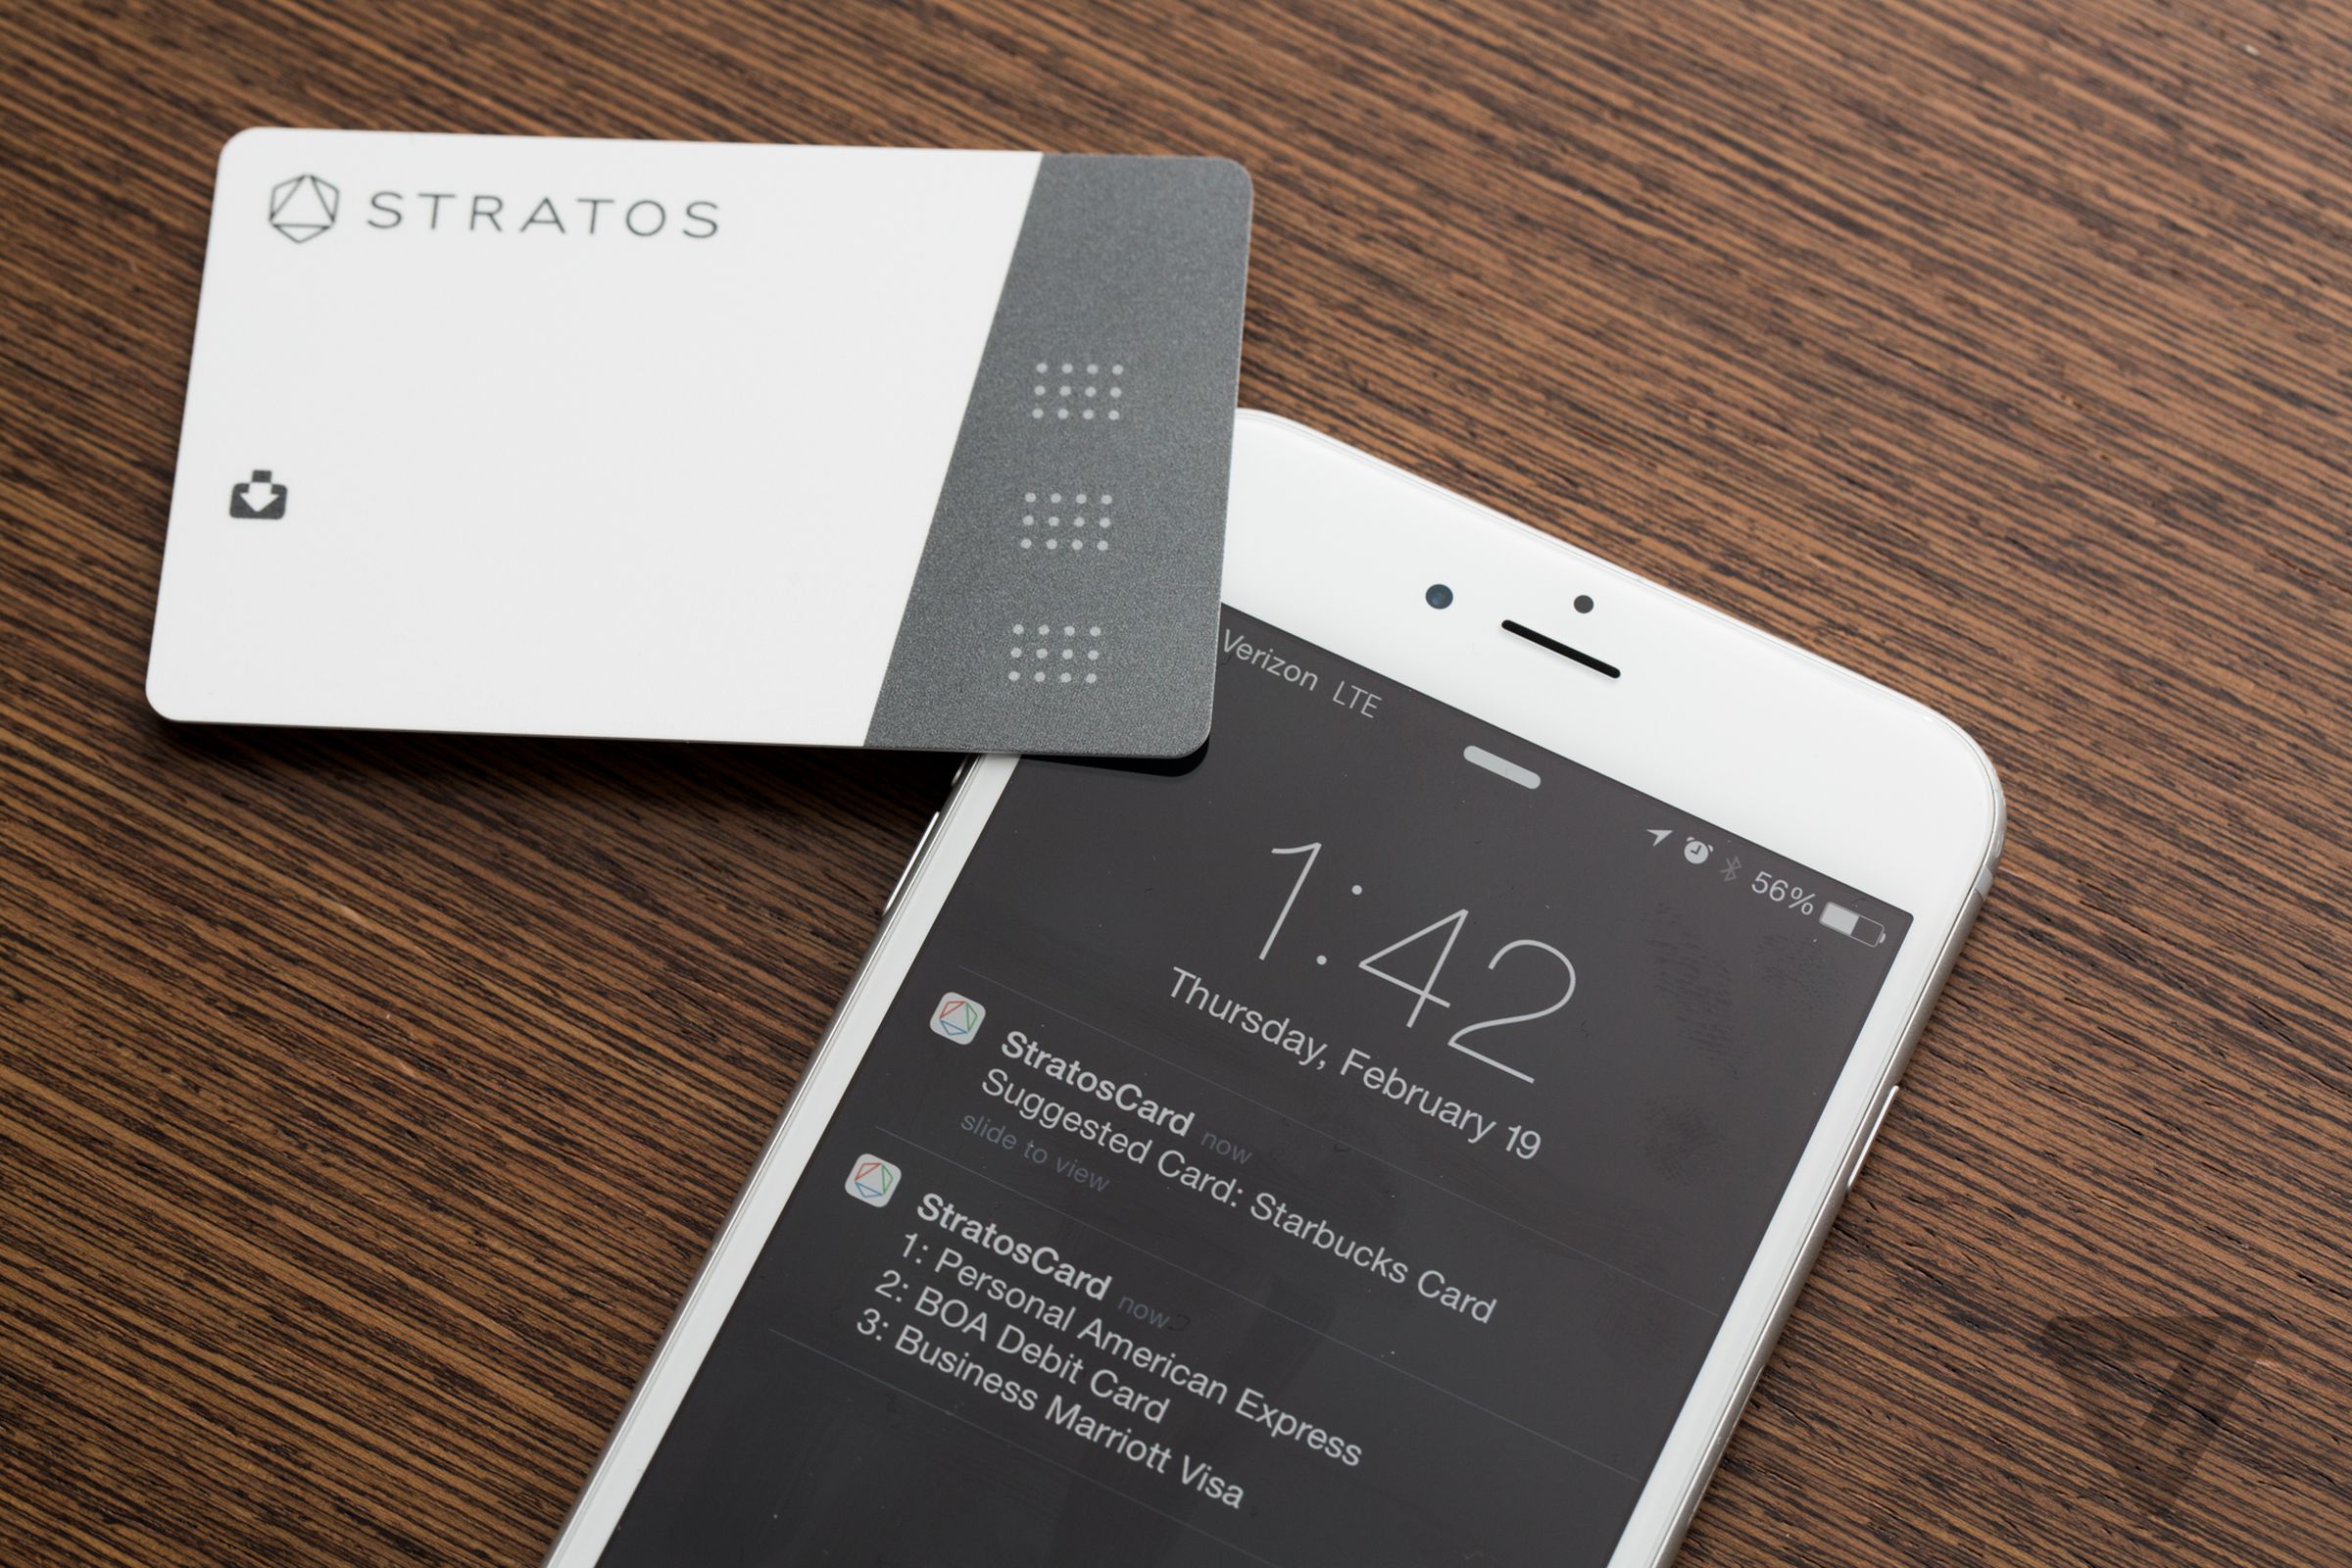 Stratos card hands-on 